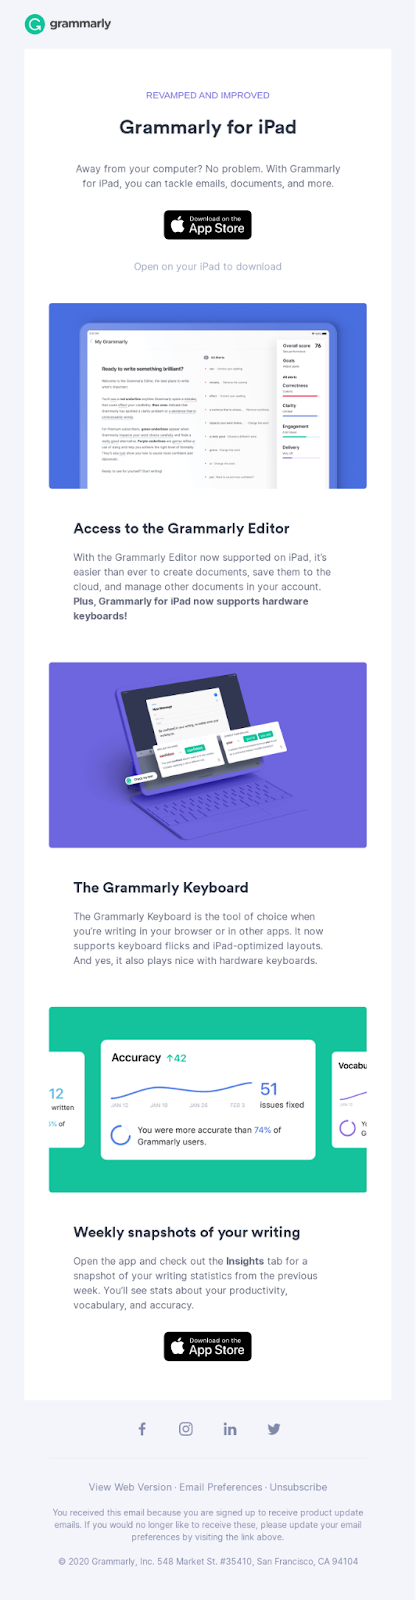 Grammarly cross-sell email example